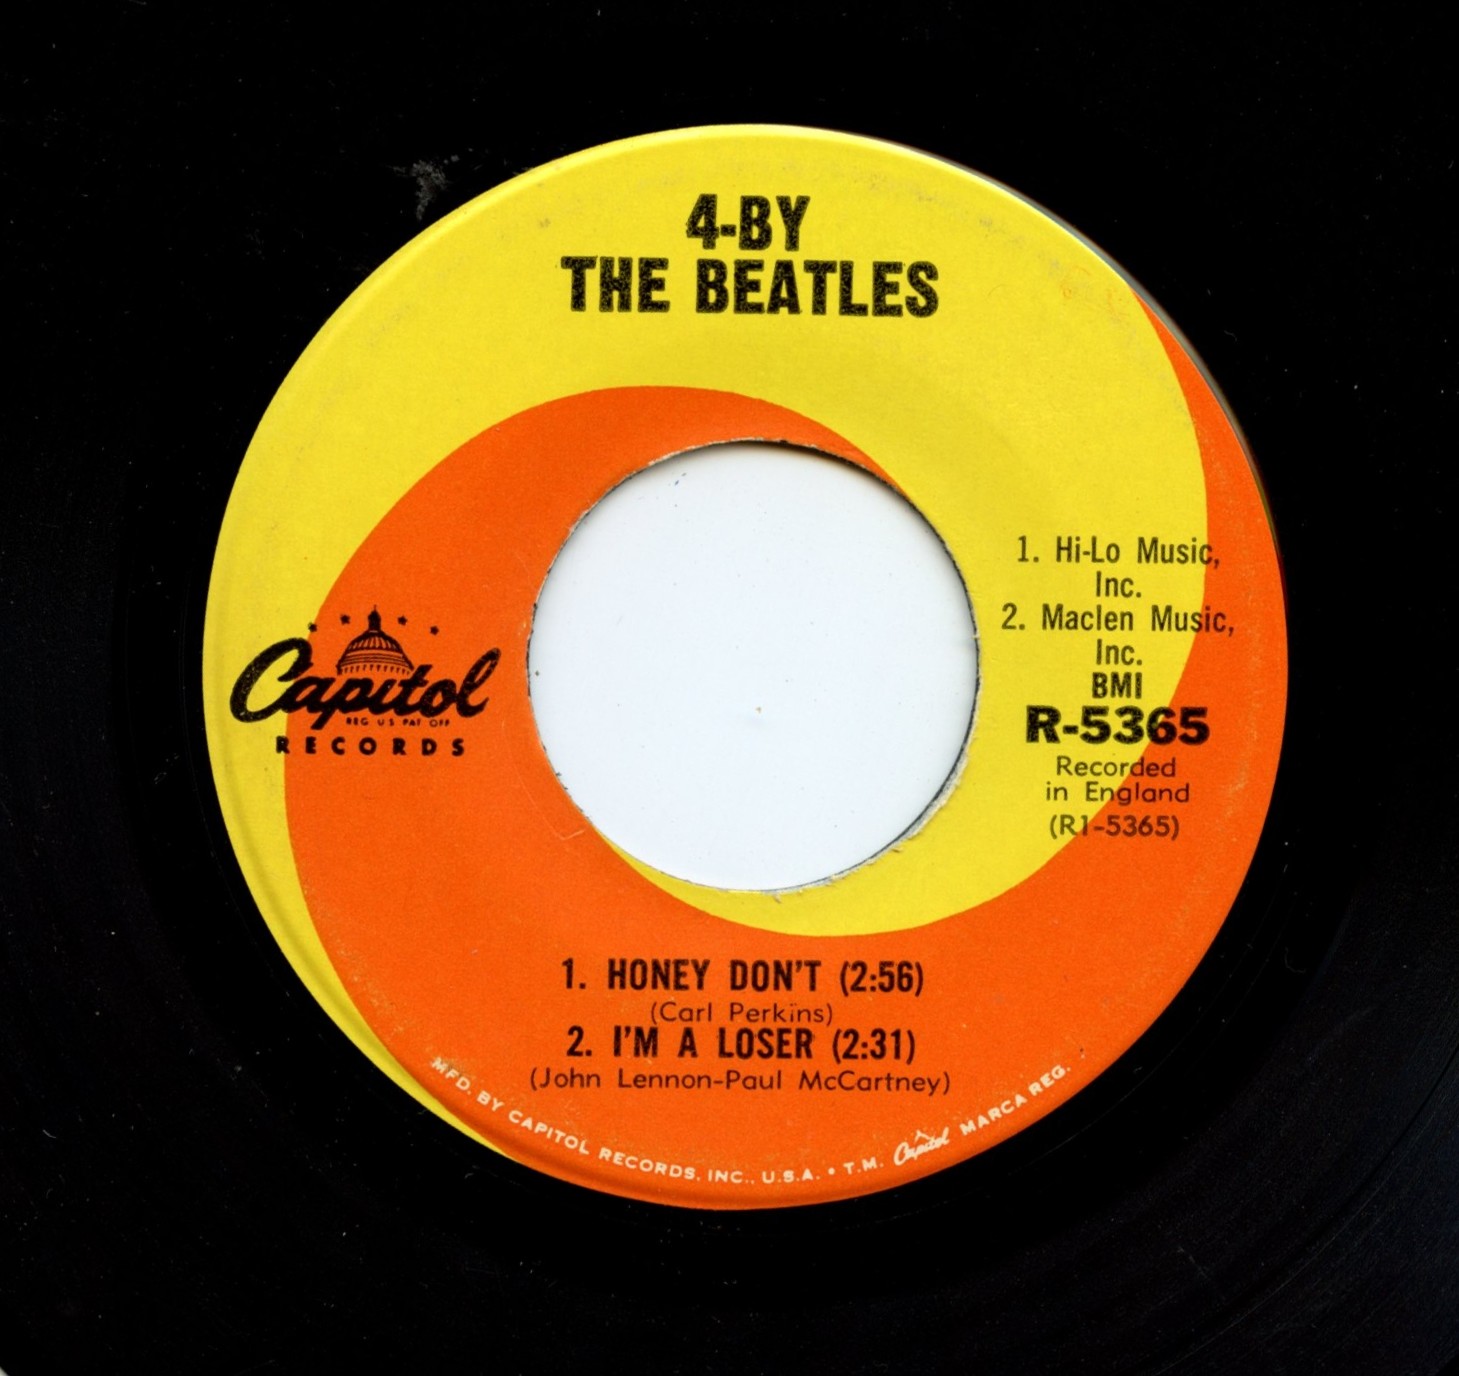 The Beatles ‎Vinyl 4 By 4 / 4 - By The Beatles 1965